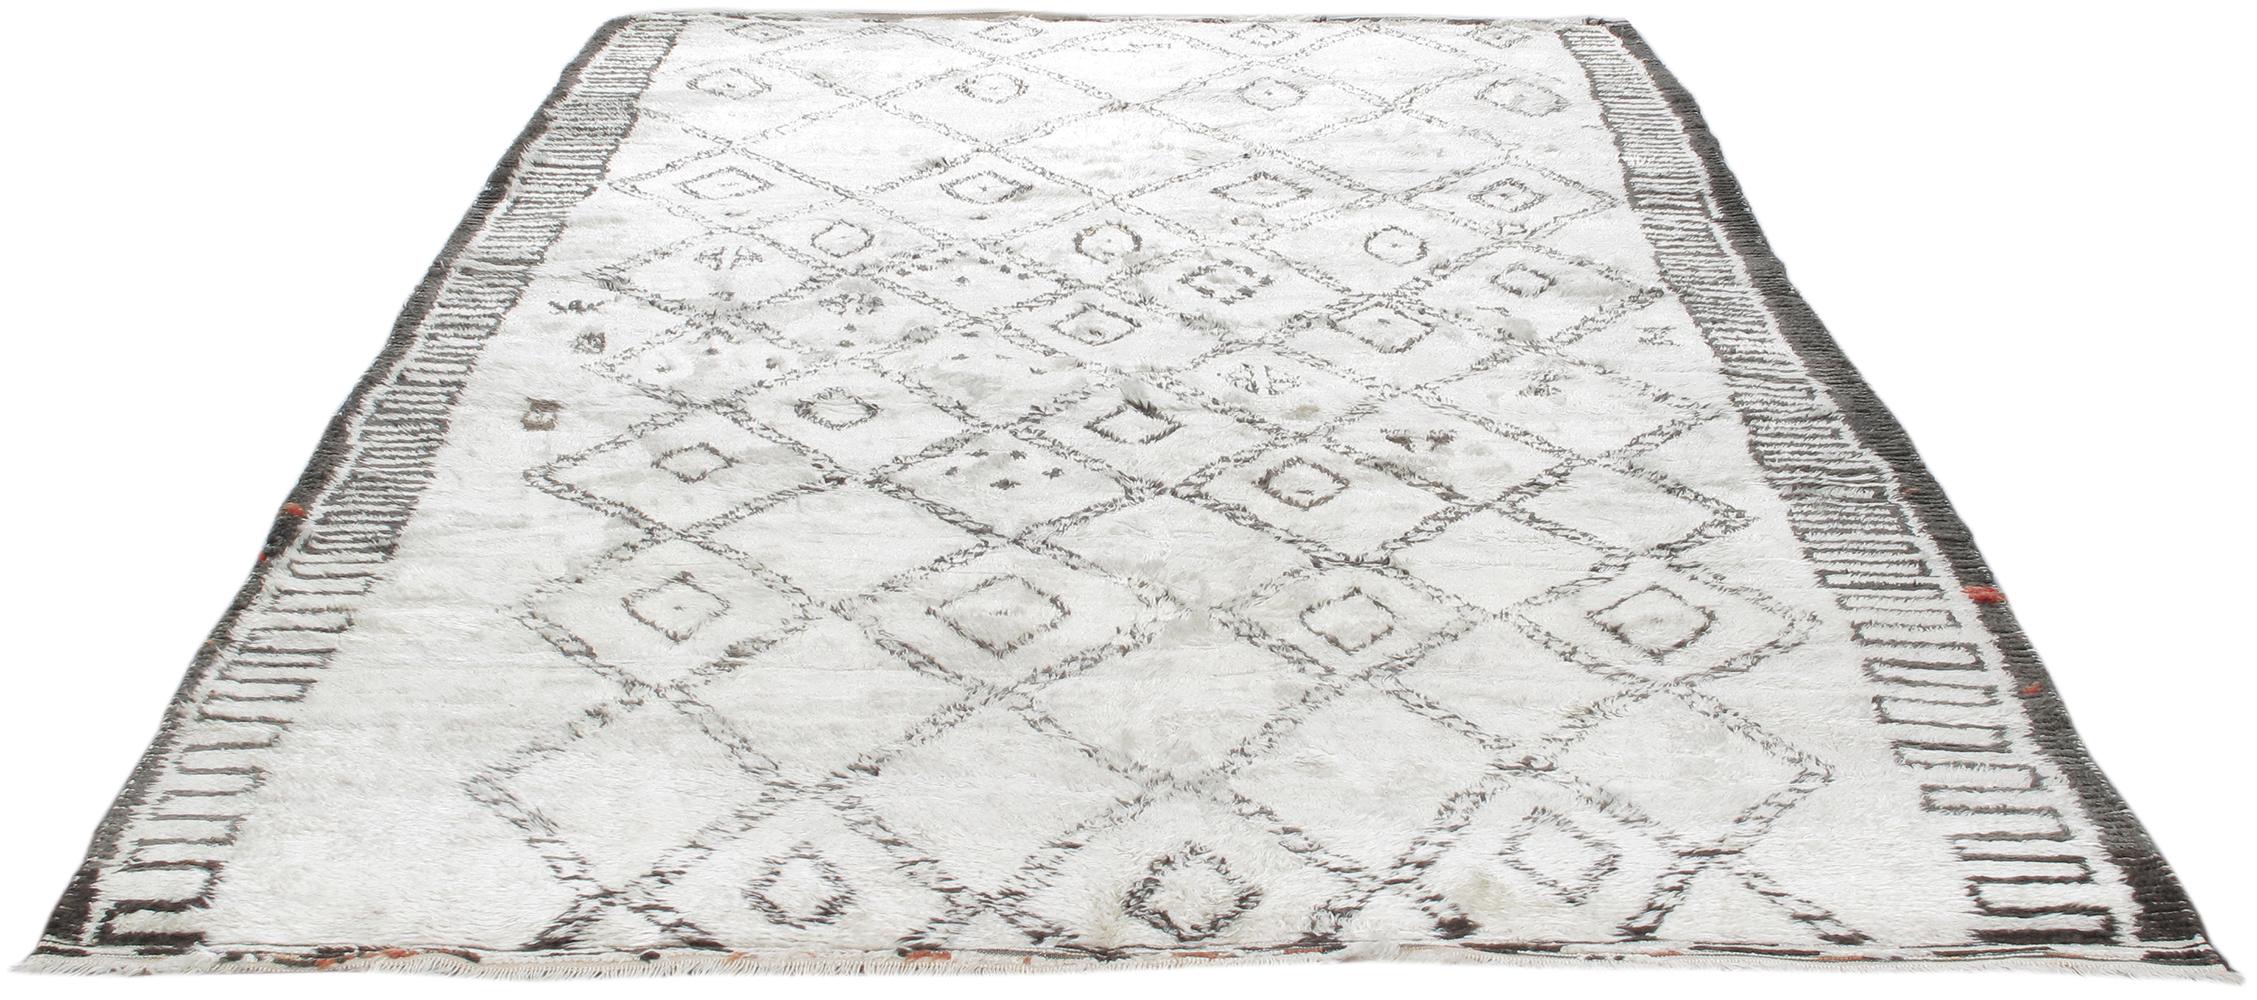 Hand-Knotted Vintage Moroccan Beni Ourain Berber Tribal Rugs For Sale